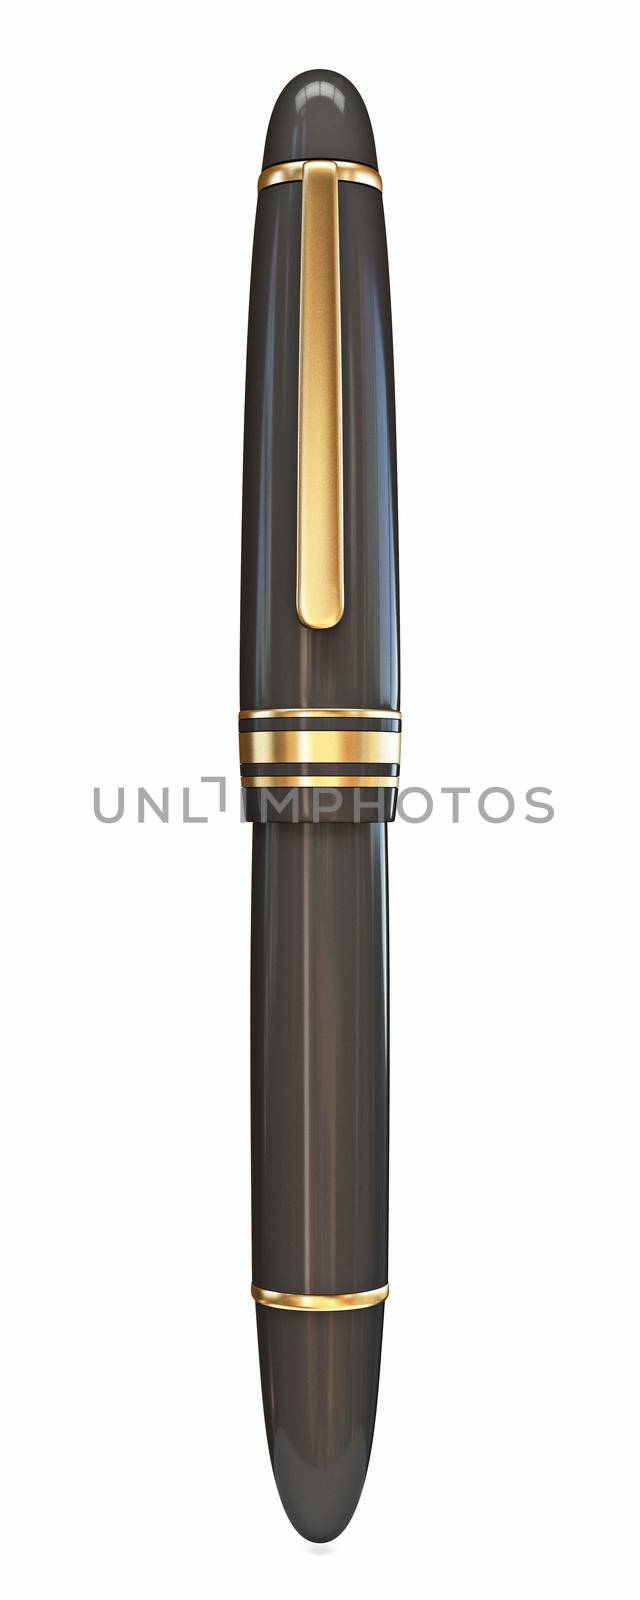 Fountain pen Vertical closed 3D render illustration isolated on white background